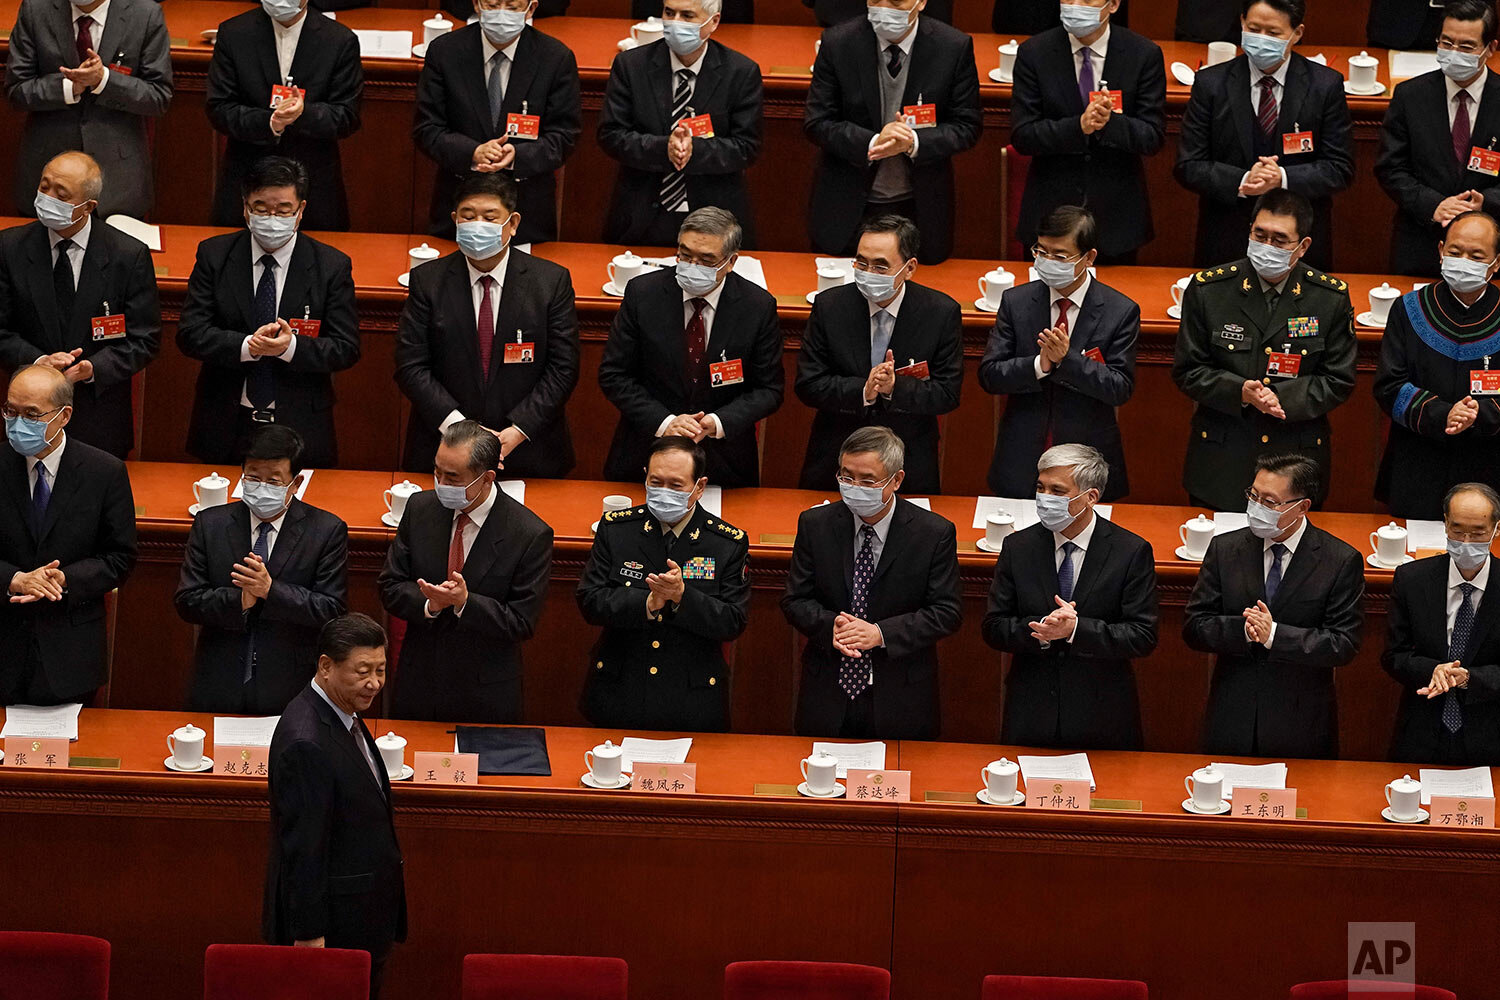  Delegates wearing face masks to help curb the spread of the coronavirus applaud as Chinese President Xi Jinping arrives for the opening session of Chinese People's Political Consultative Conference (CPPCC) at the Great Hall of the People in Beijing,